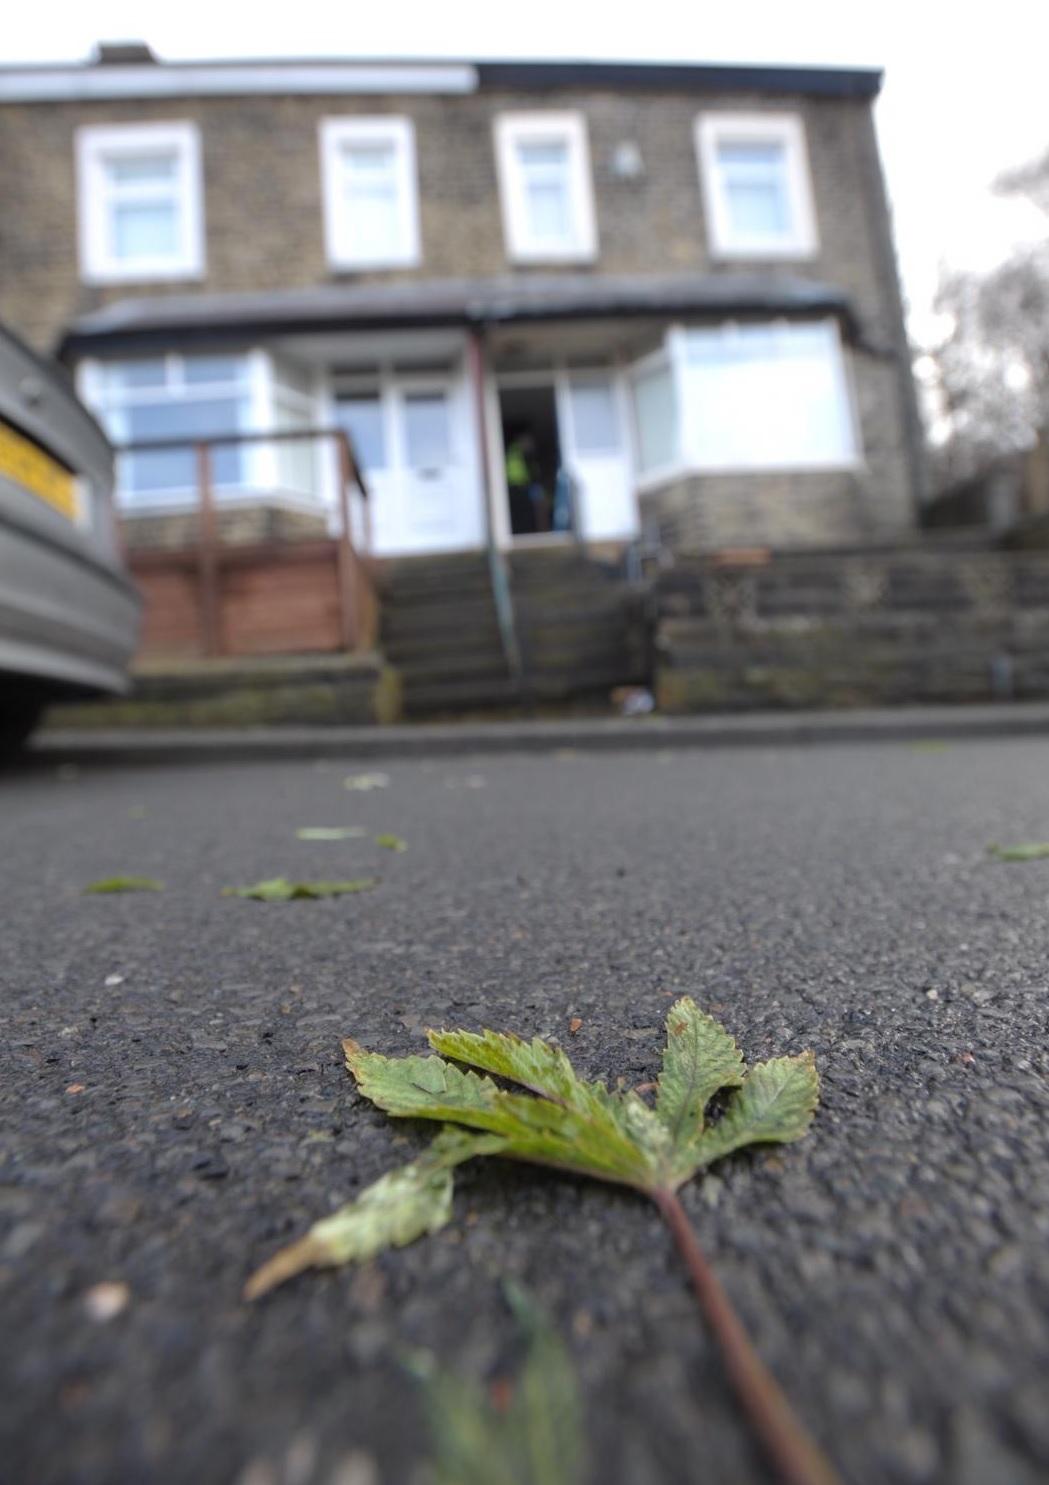 Download Worry For Residents After Shocking Cannabis Farm Burglary Bradford Telegraph And Argus